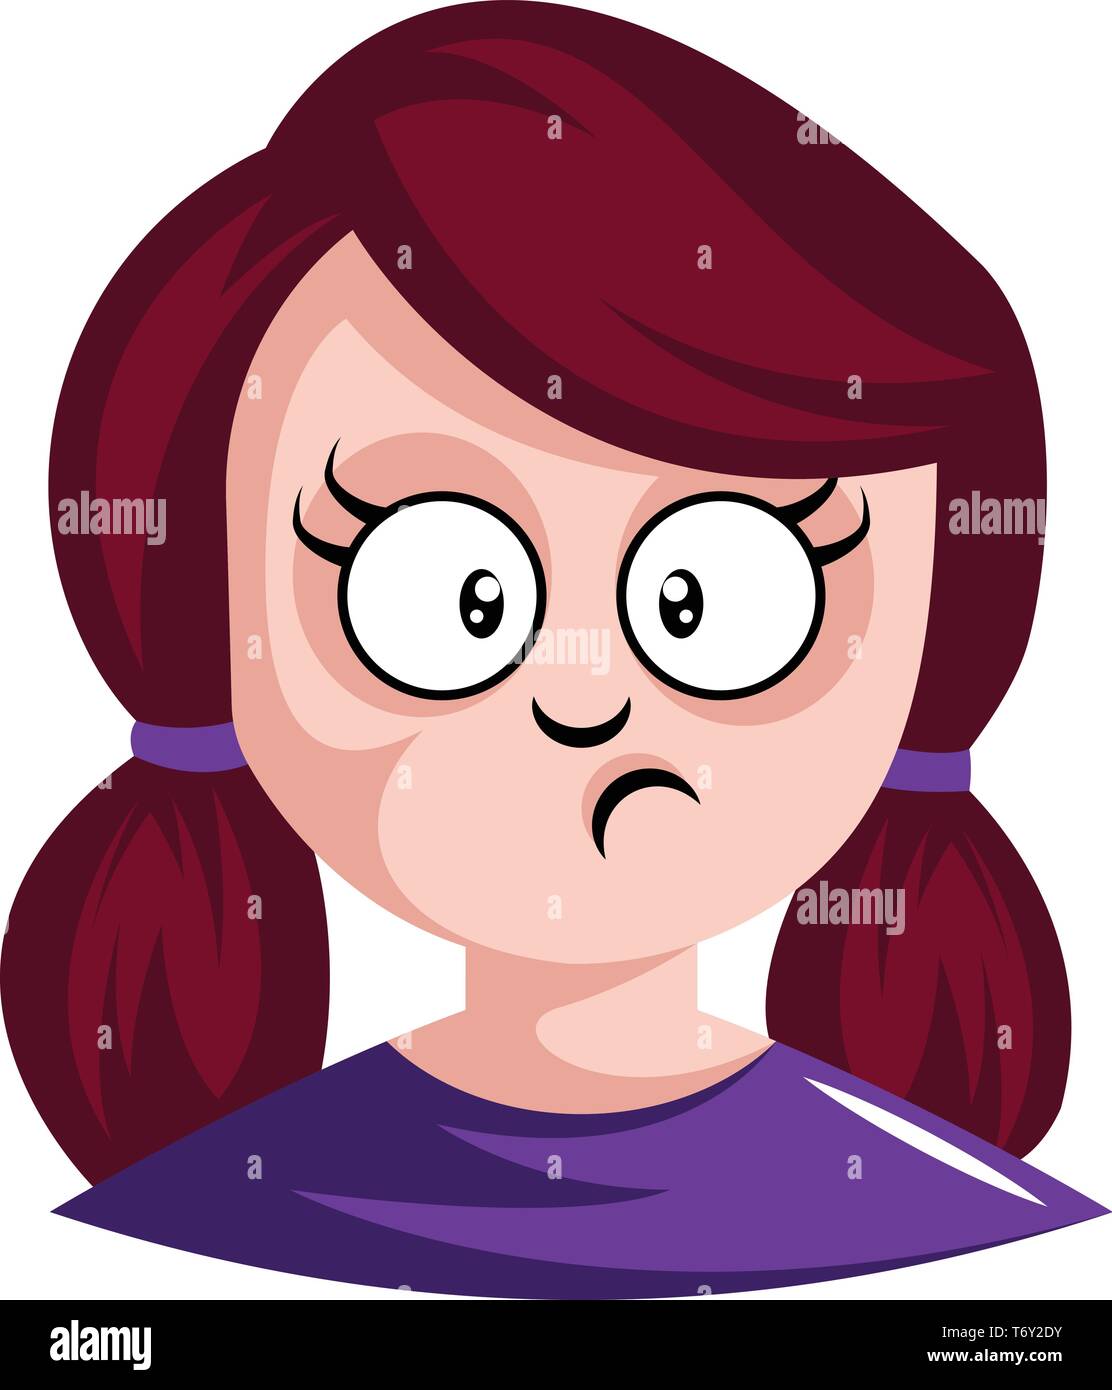 Girl with red hair tied in pigtails is confused illustration vector on white background Stock Vector